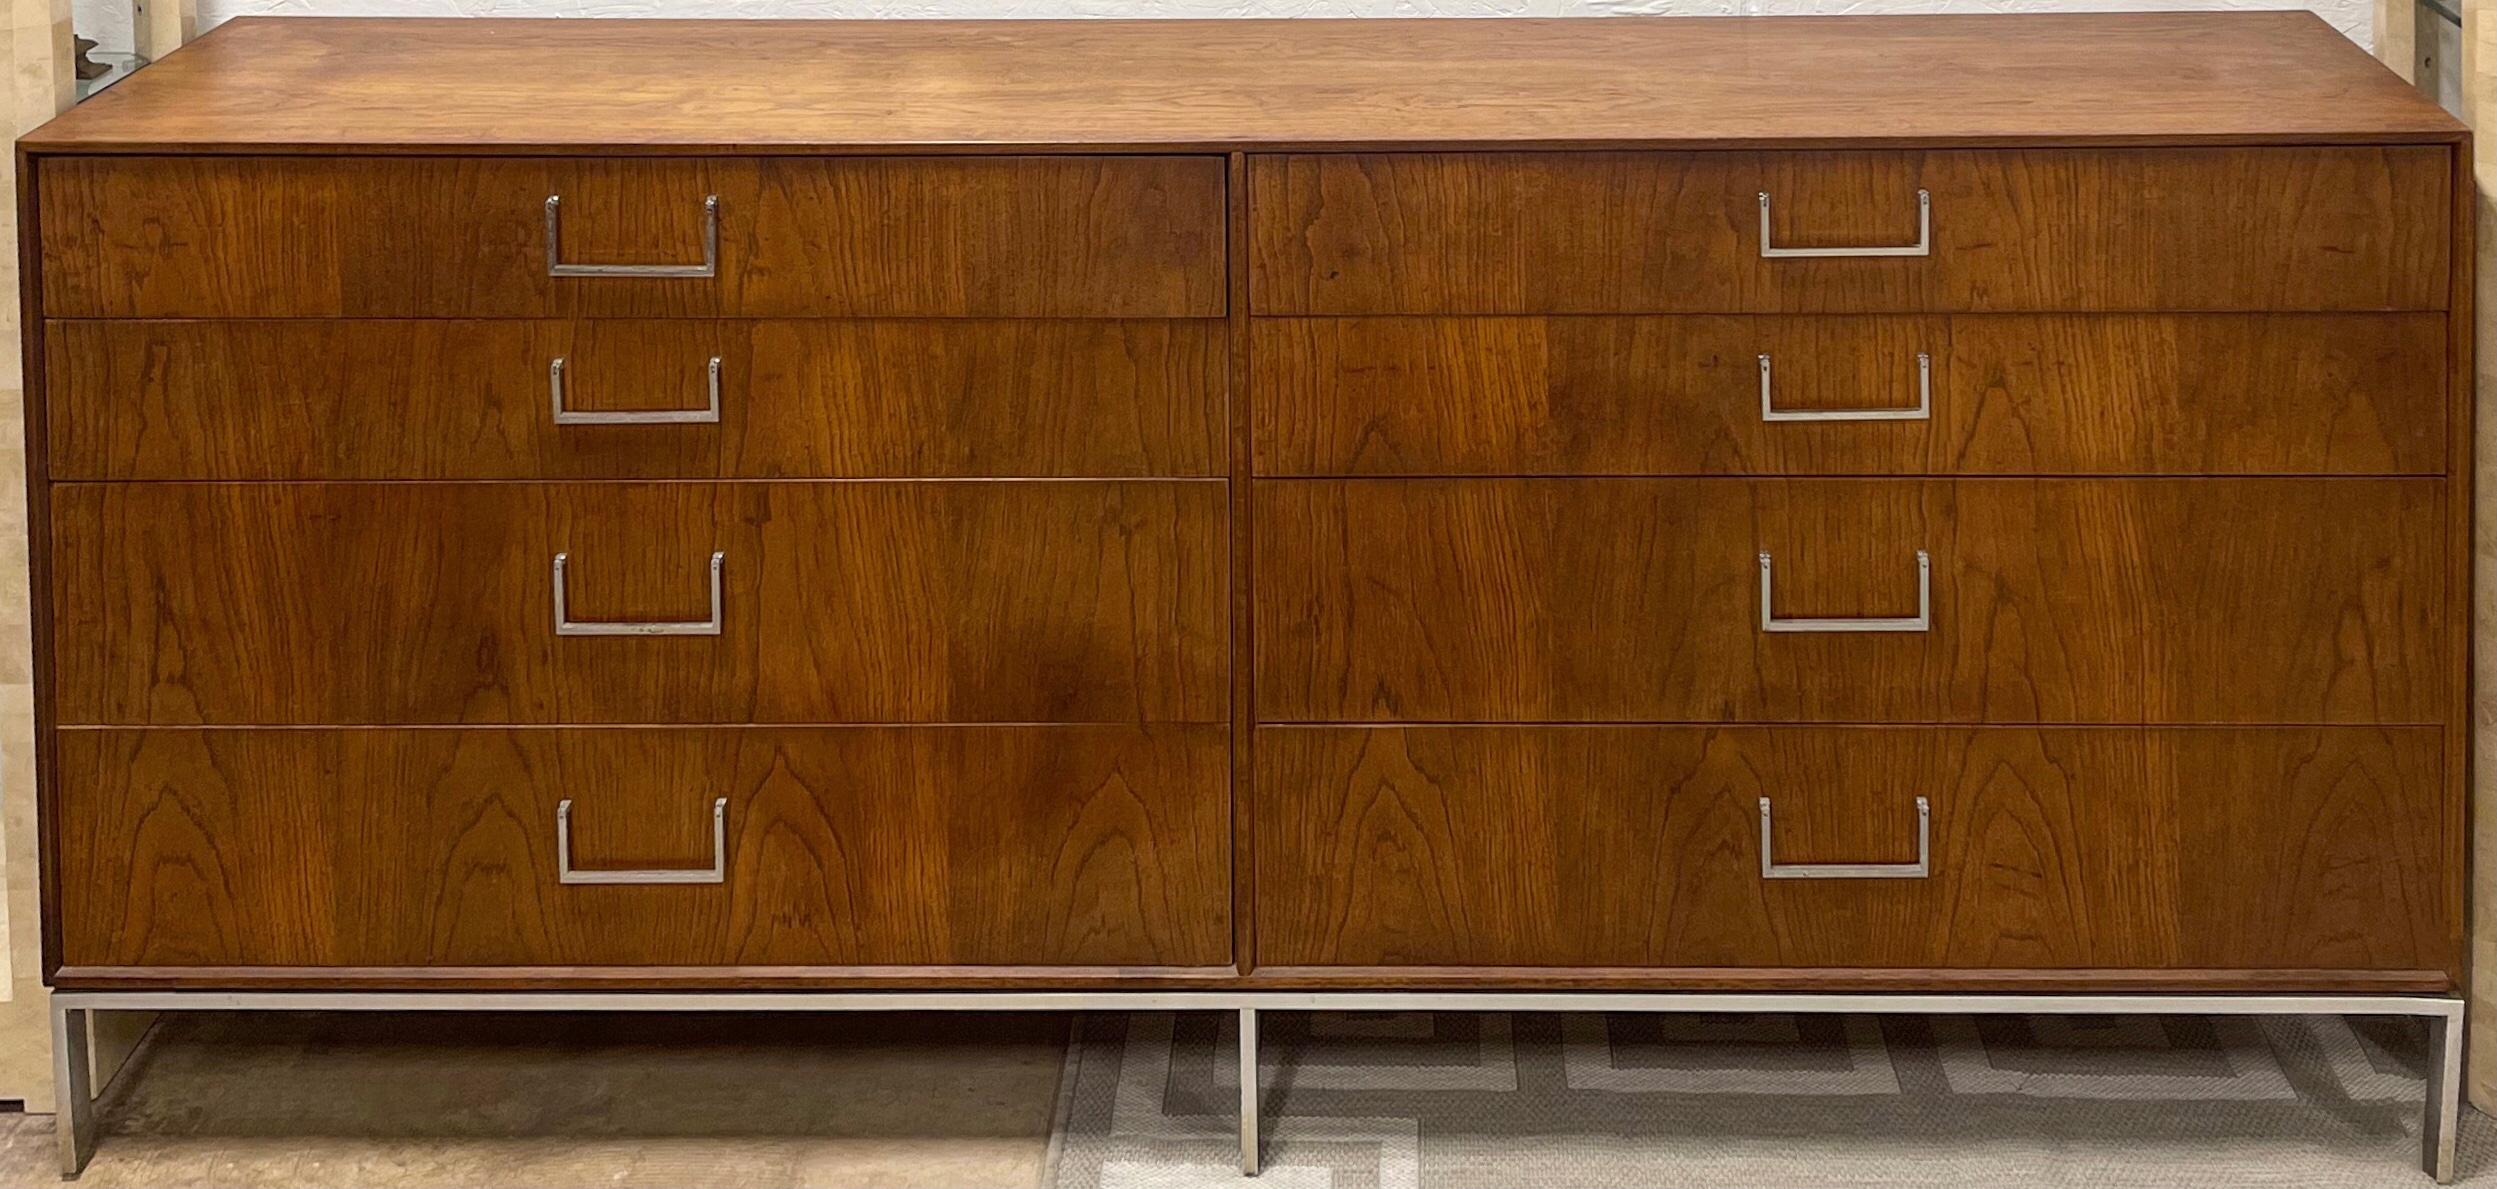 This is a walnut credenza on a chrome base with chrome pulls. It has dovetail construction. This mid-century modern piece is attributed to Florence Knoll. It’s iconic design with it’s clean lines give it timeless modern elegance.